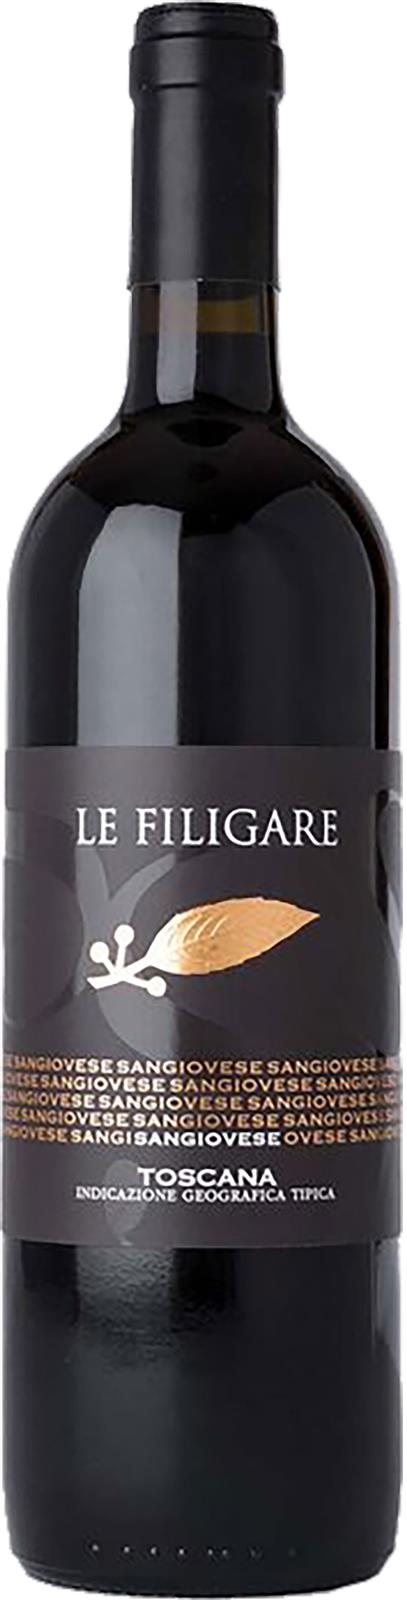 Le Filigare Sangiovese Toscana IGT 2018 (Italy)